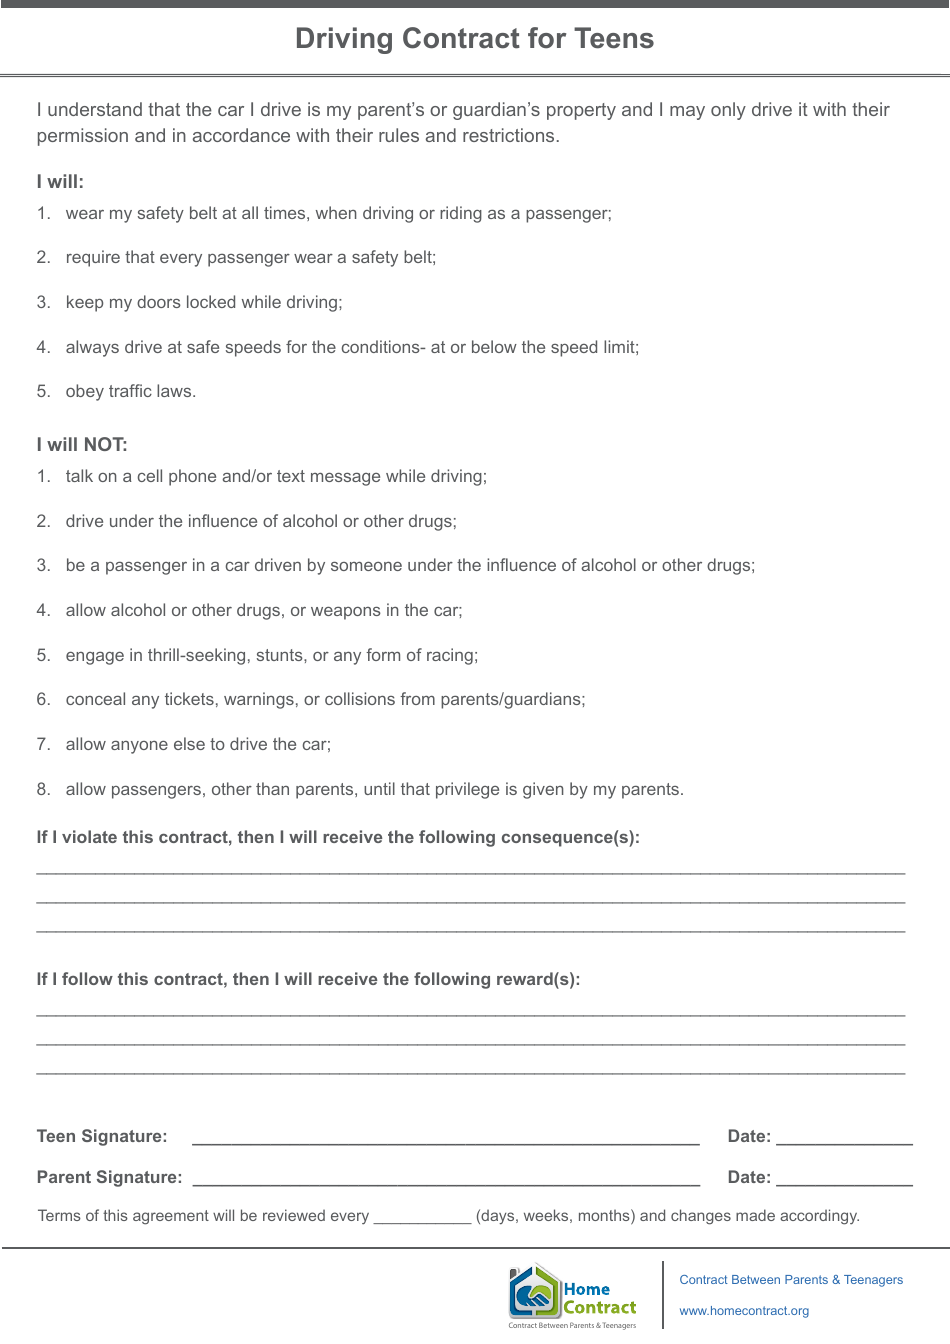 Driving Contract for Teens Template - Home Contract, Page 1